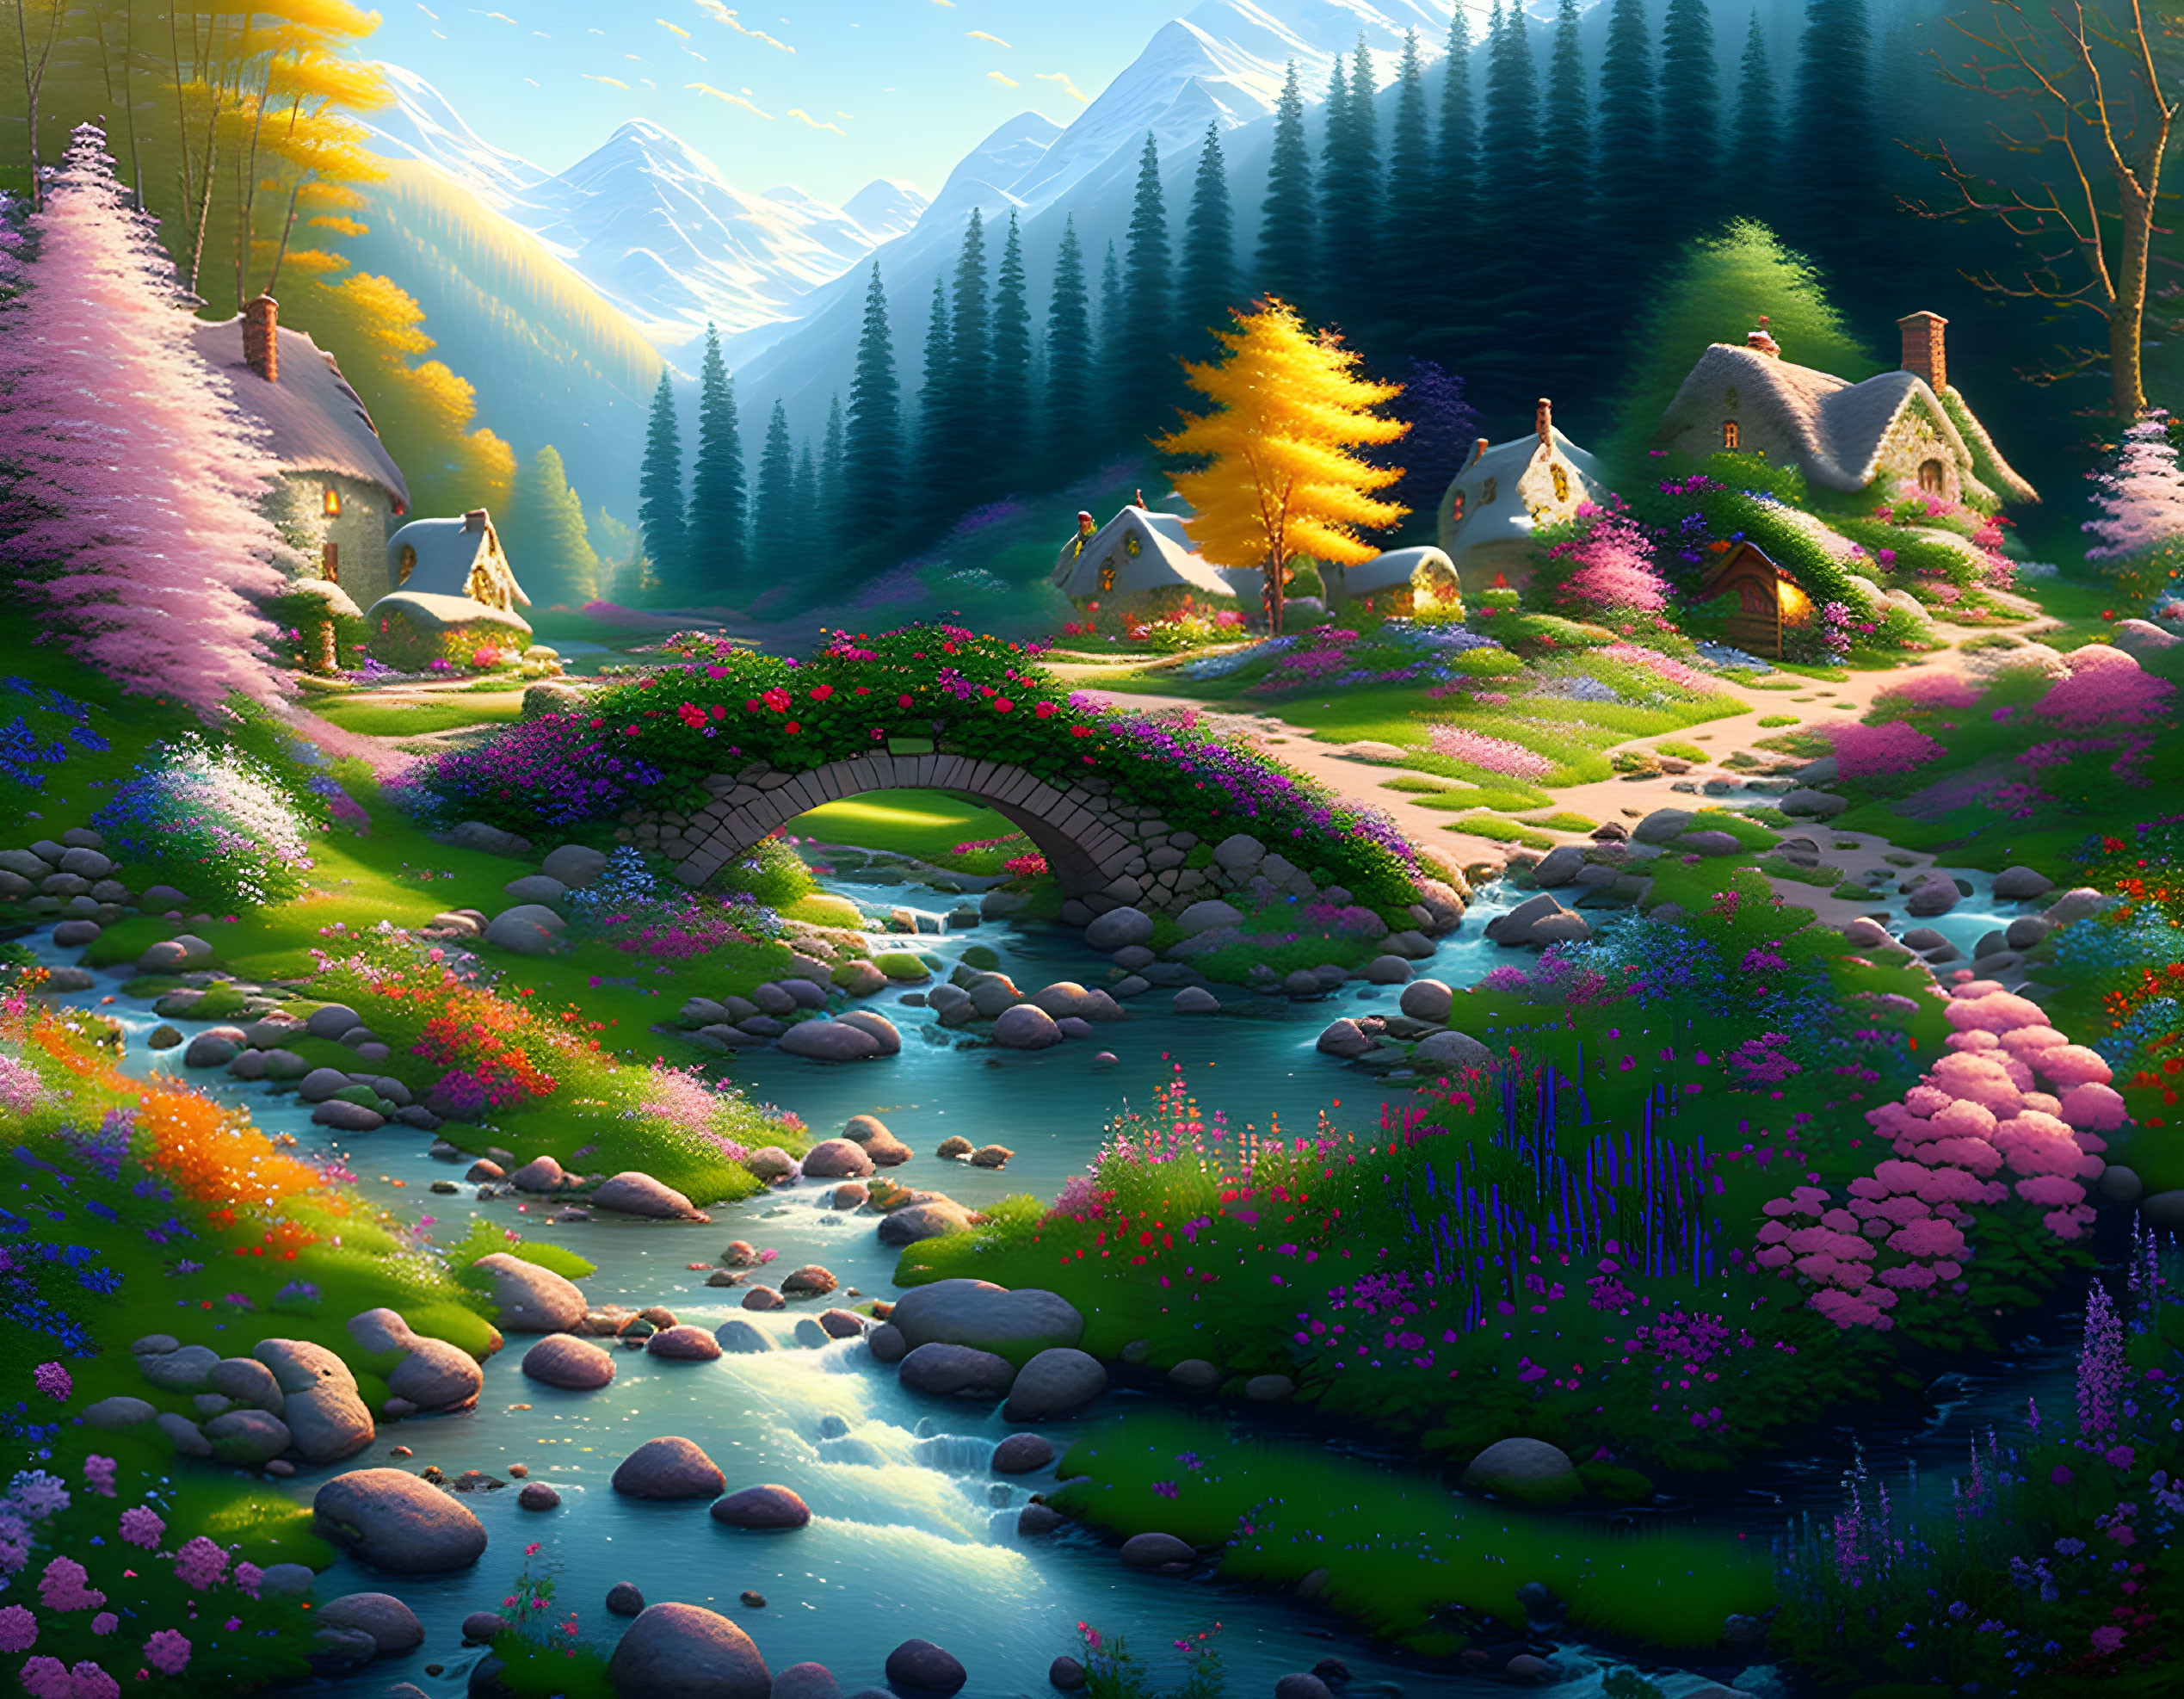 Colorful fantasy landscape with cottages, stone bridge, and mountains in golden light